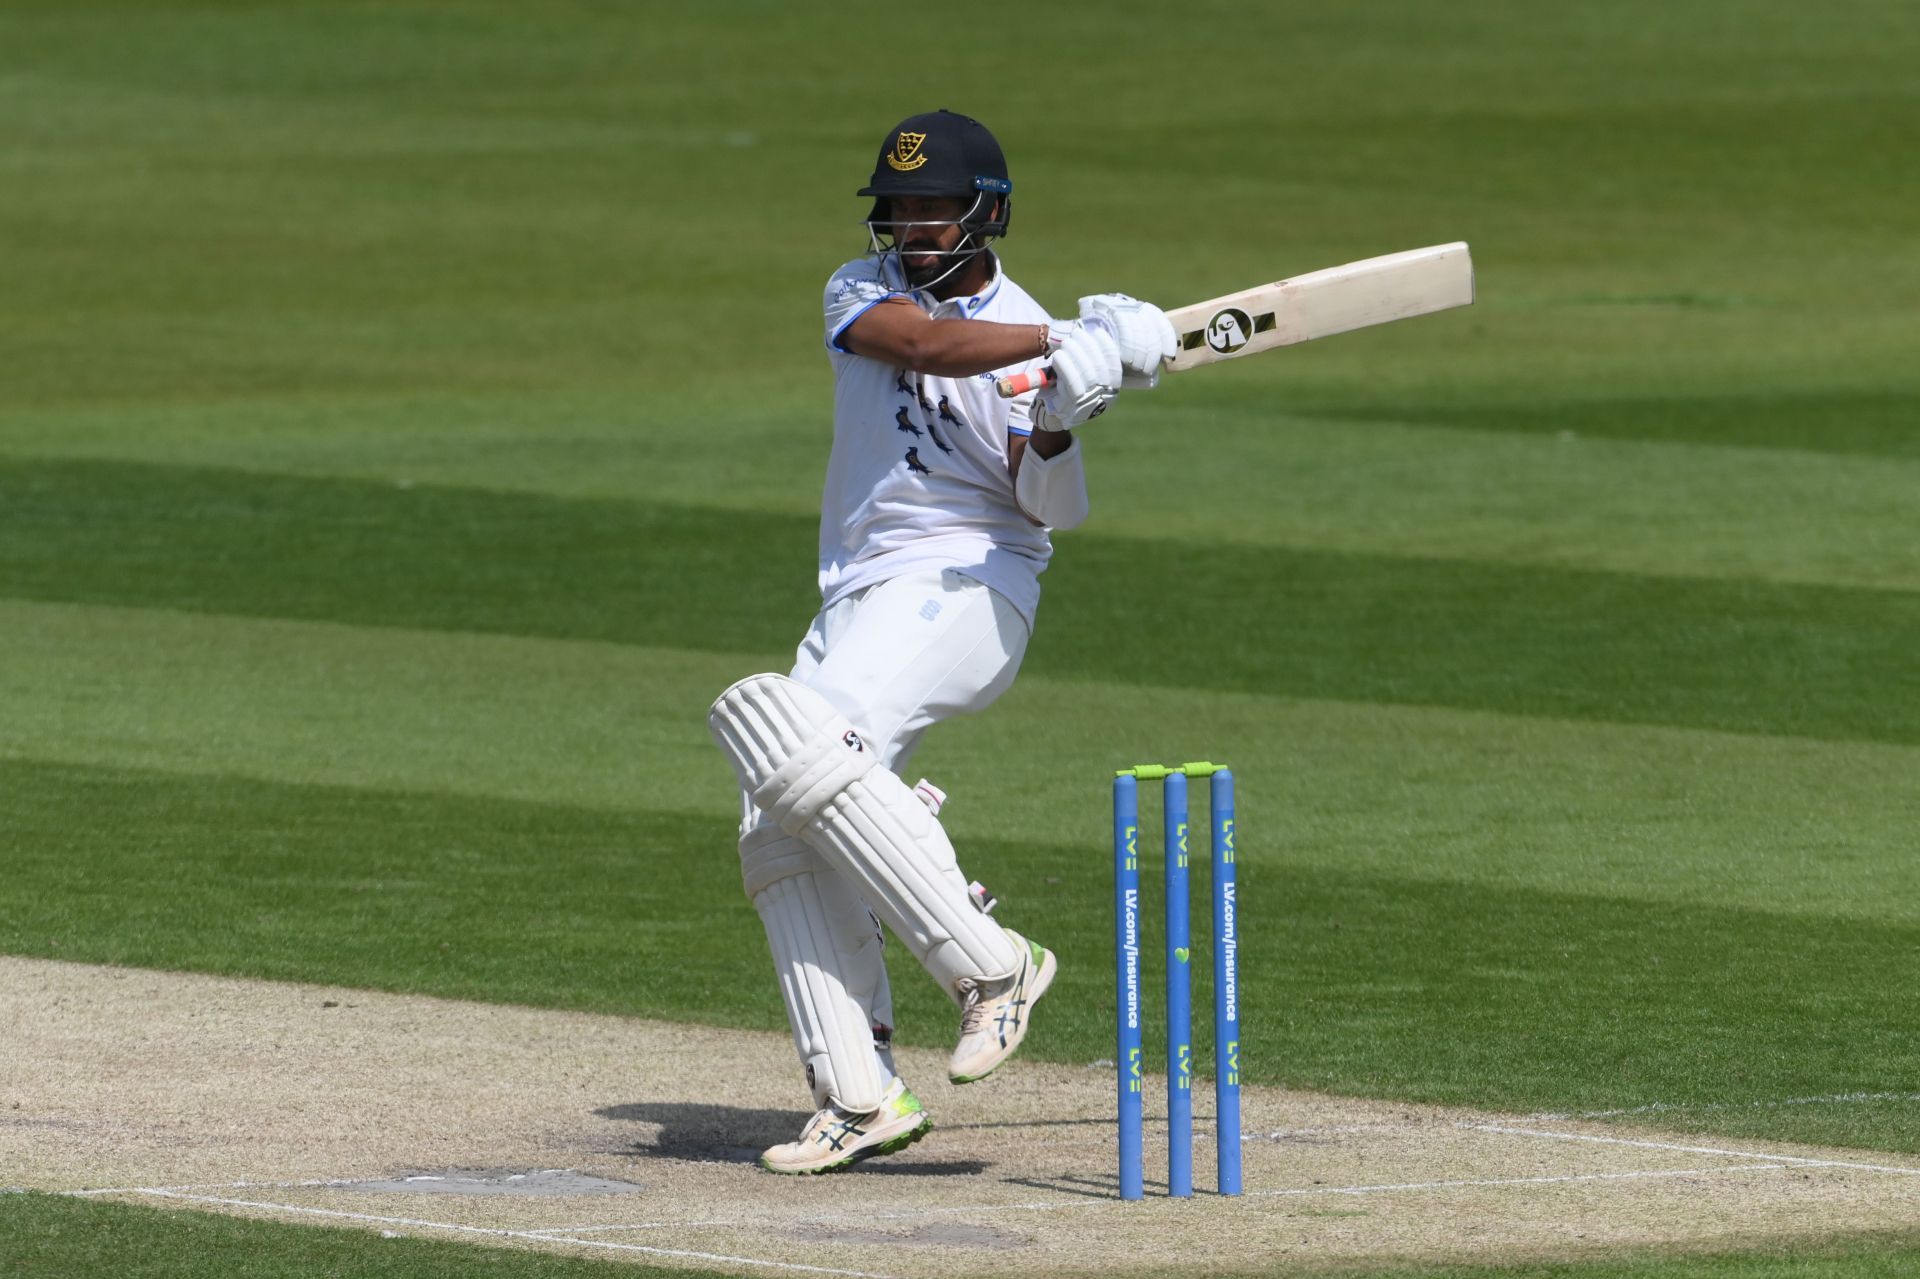 Pujara has had a great county stint with Sussex (Image courtesy: Getty Images)